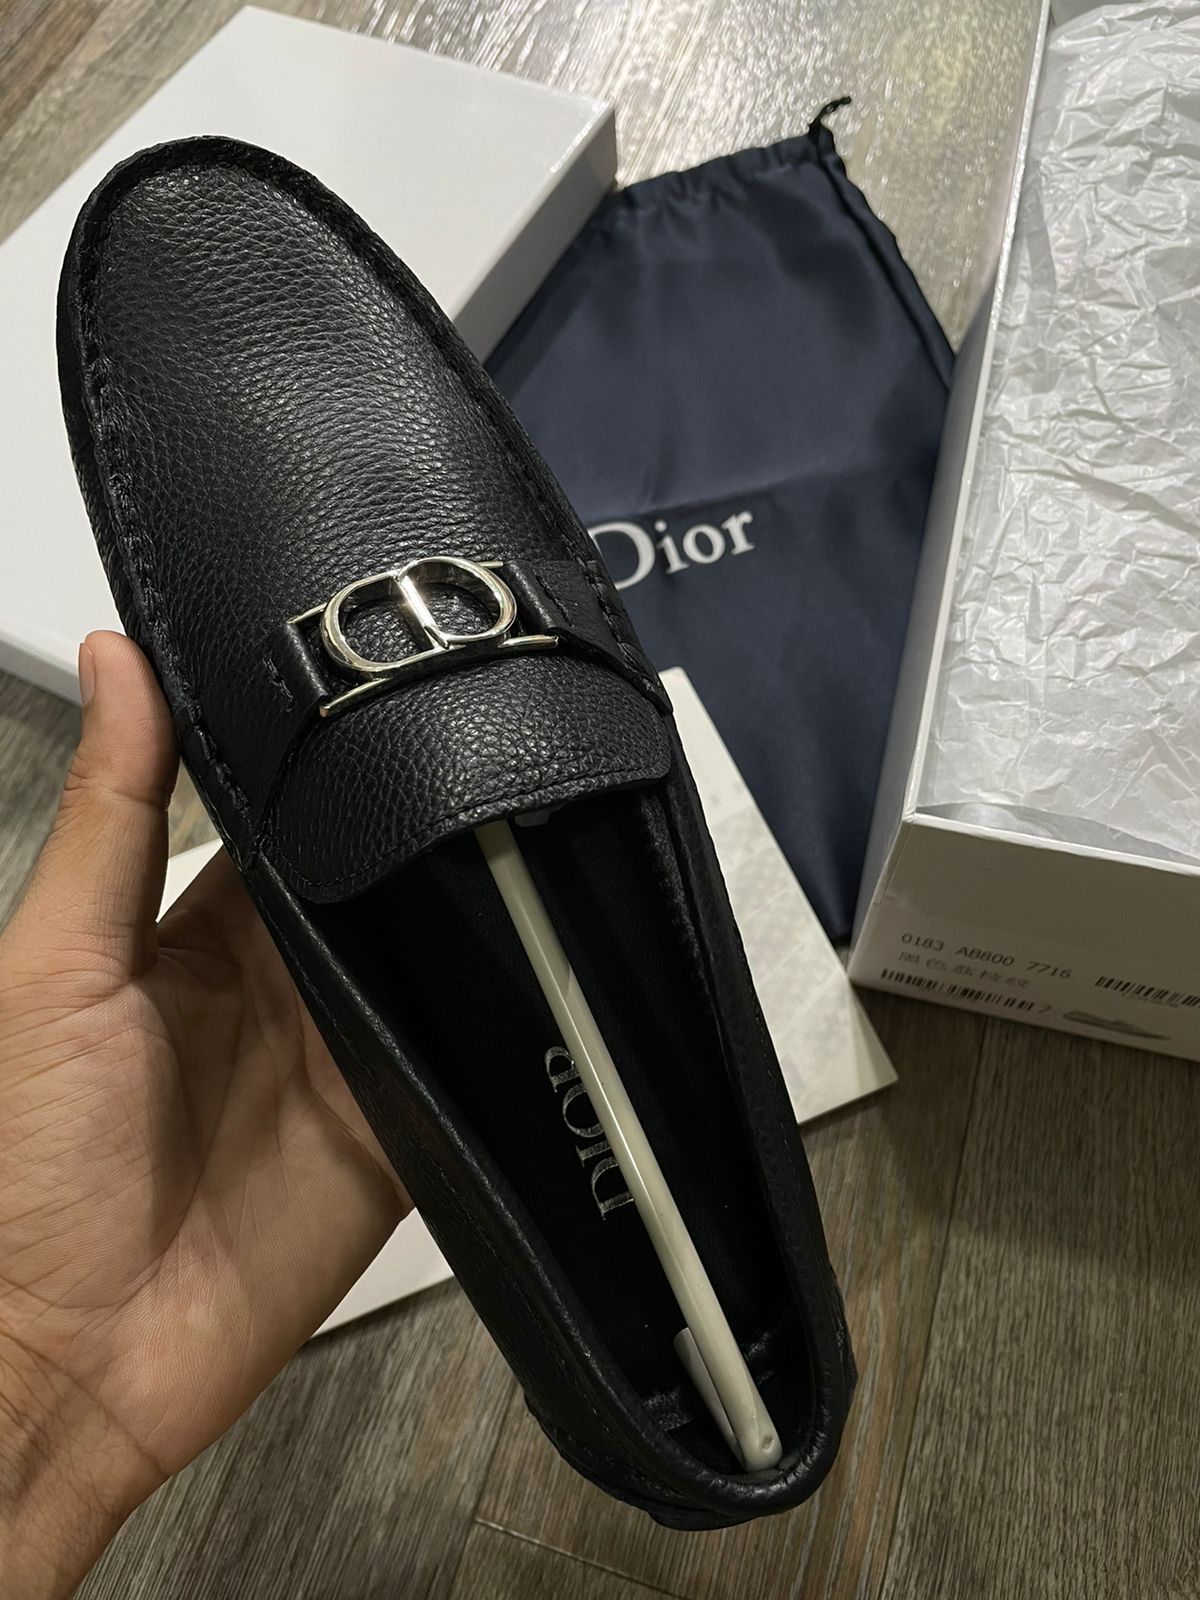 Luxury Latest Black Loafers For Men – Yard of Deals